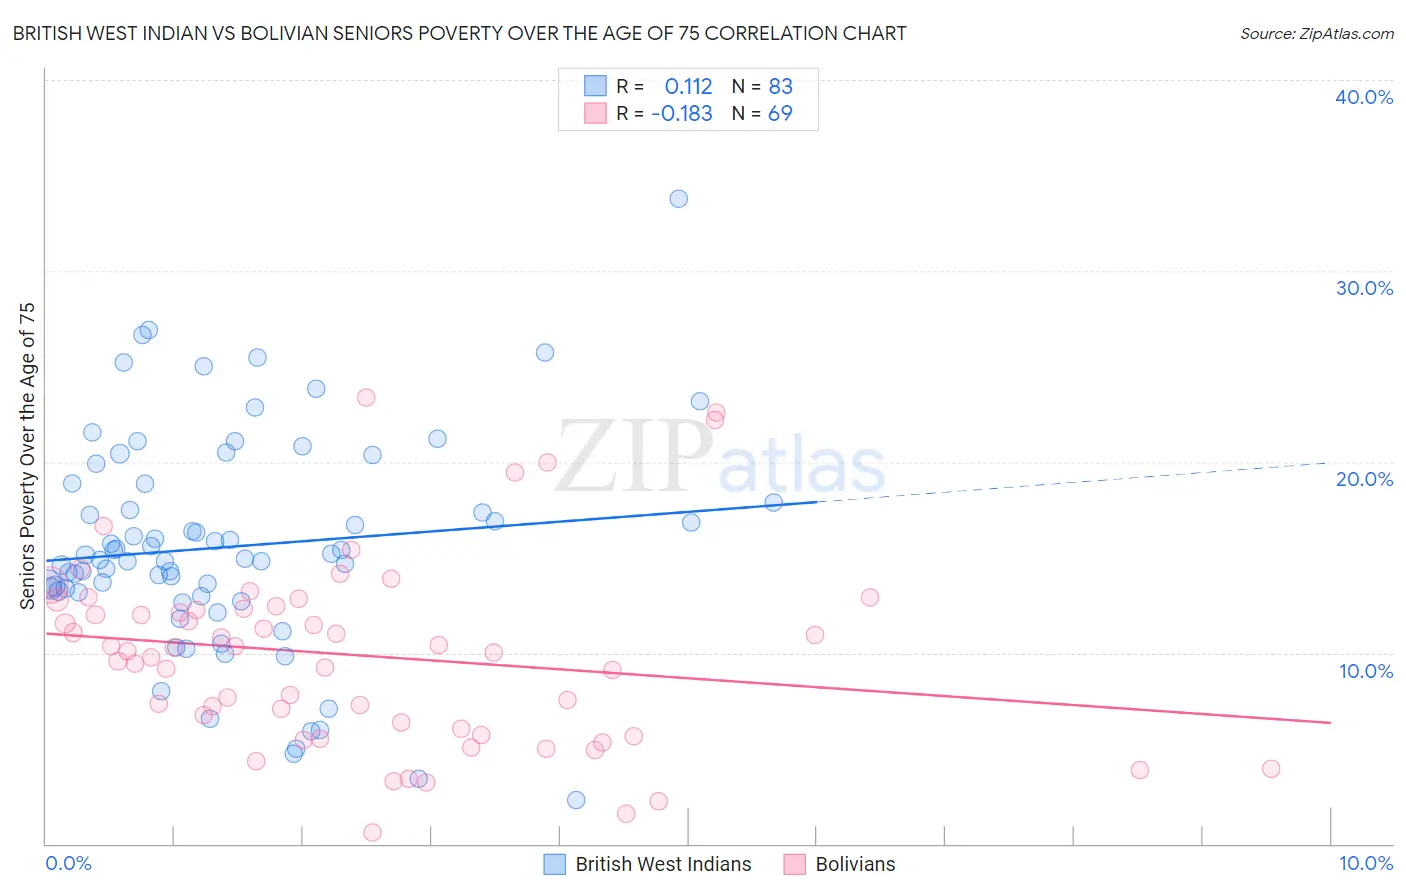 British West Indian vs Bolivian Seniors Poverty Over the Age of 75